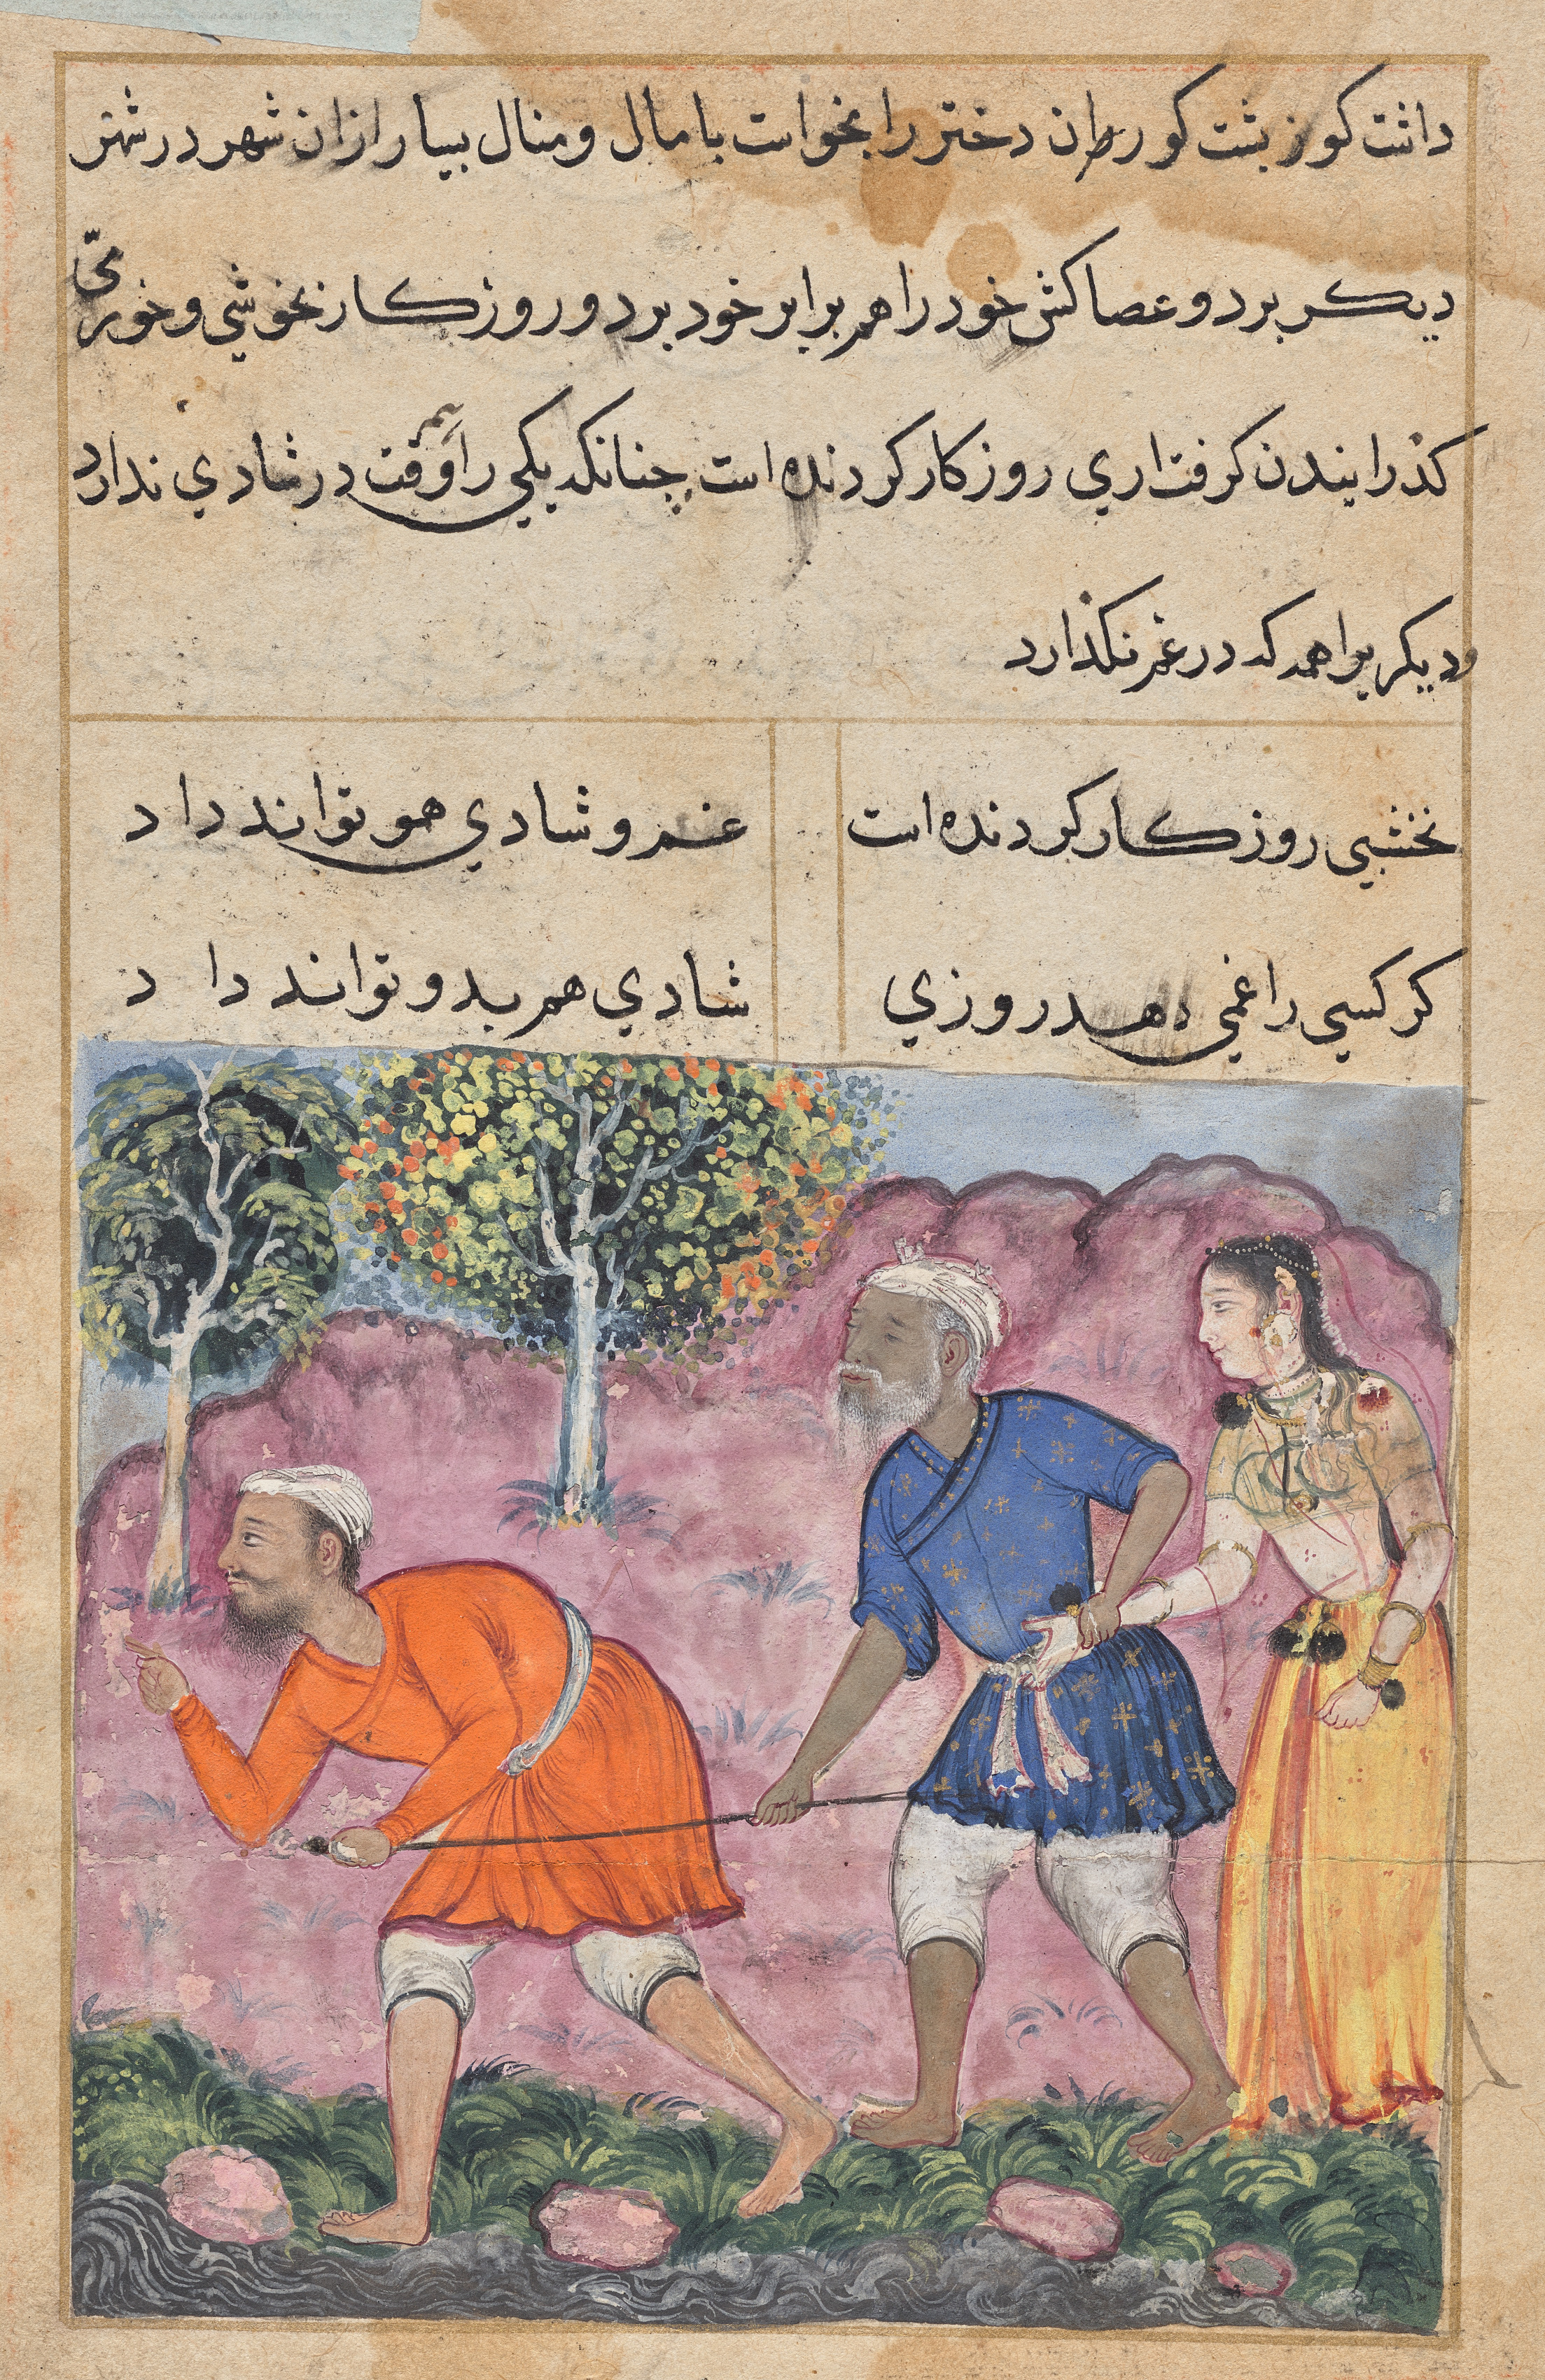 The Raja’s daughter, born with three breasts, accompanies her blind husband and his hunchback guide on a journey, from a Tuti-nama (Tales of a Parrot): Forty-second Night